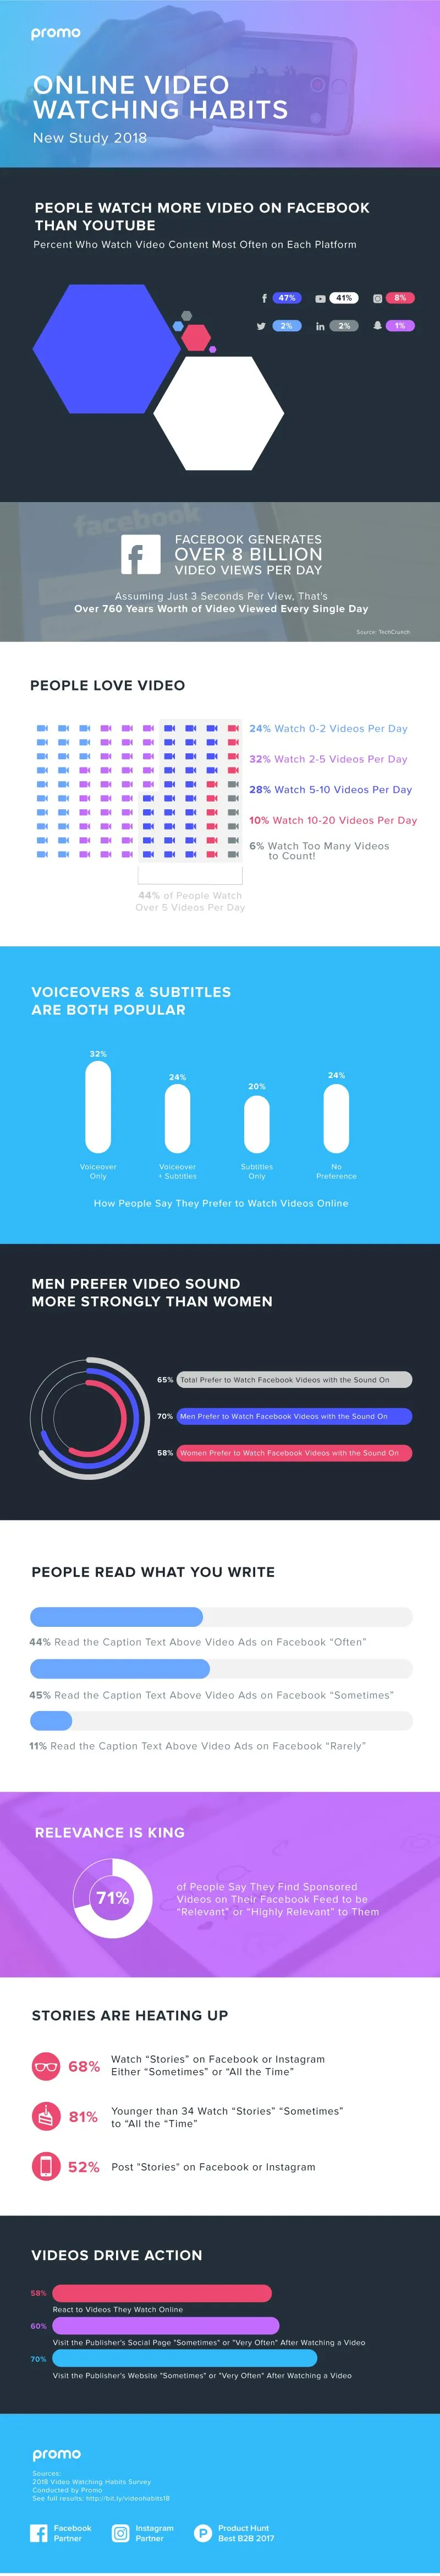 Online Video Watching Habits 2018 [Infographic]